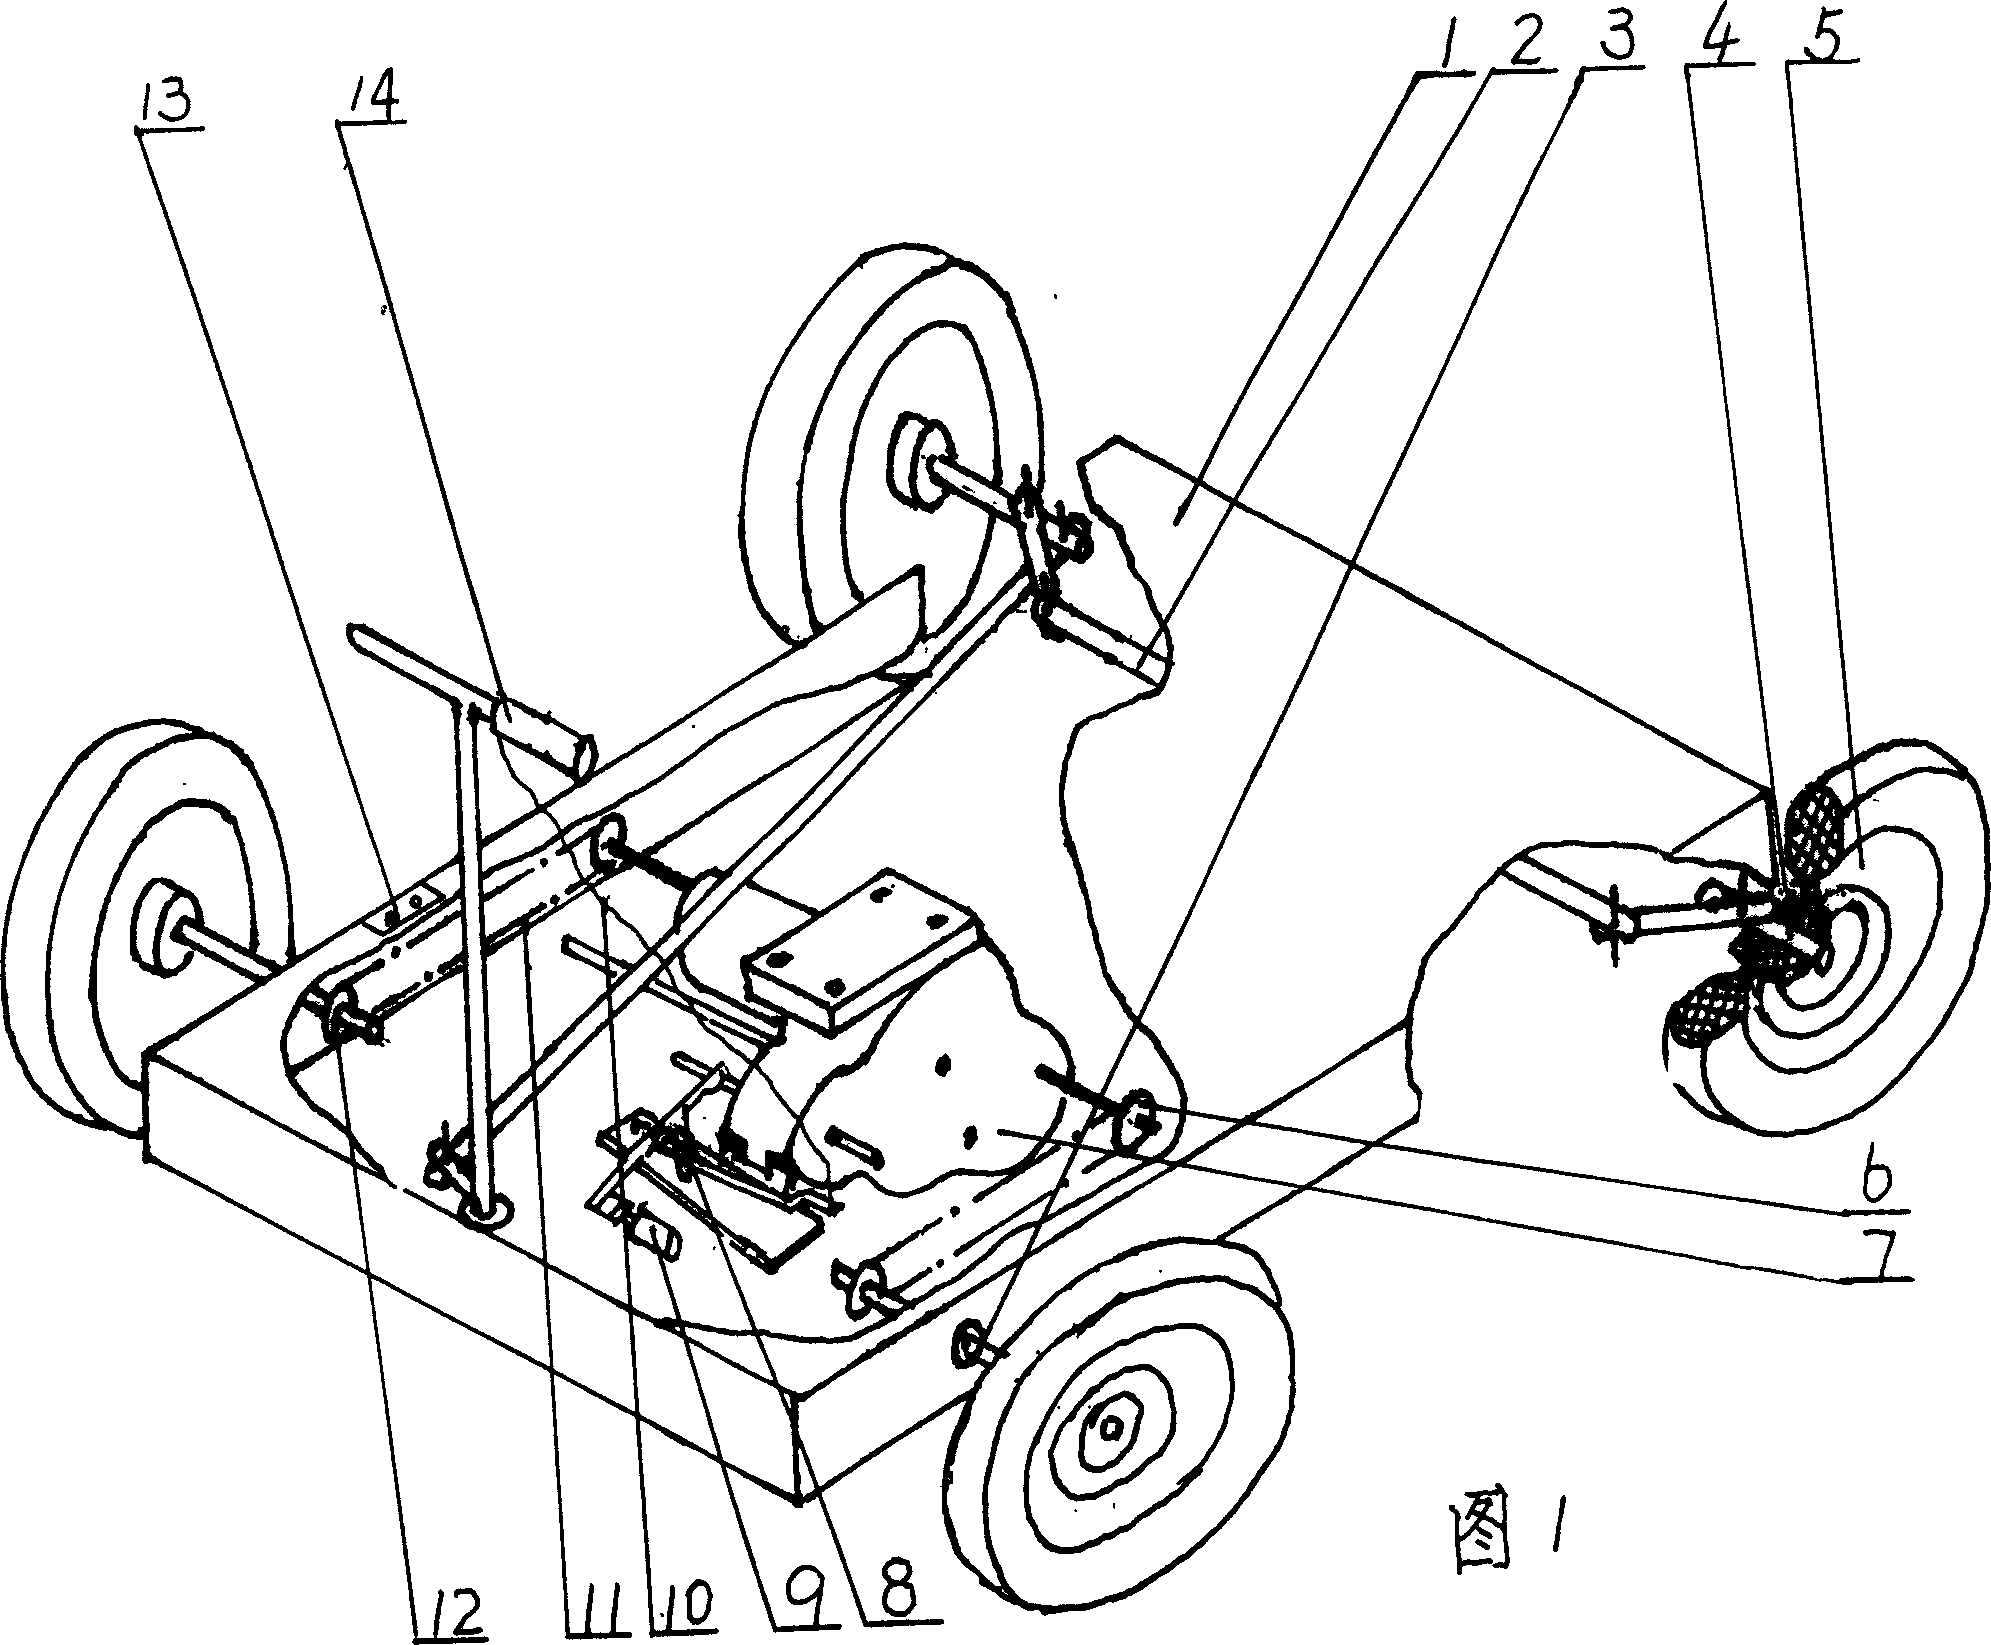 Two-purpose lighting vehicle driven by electrically or manually